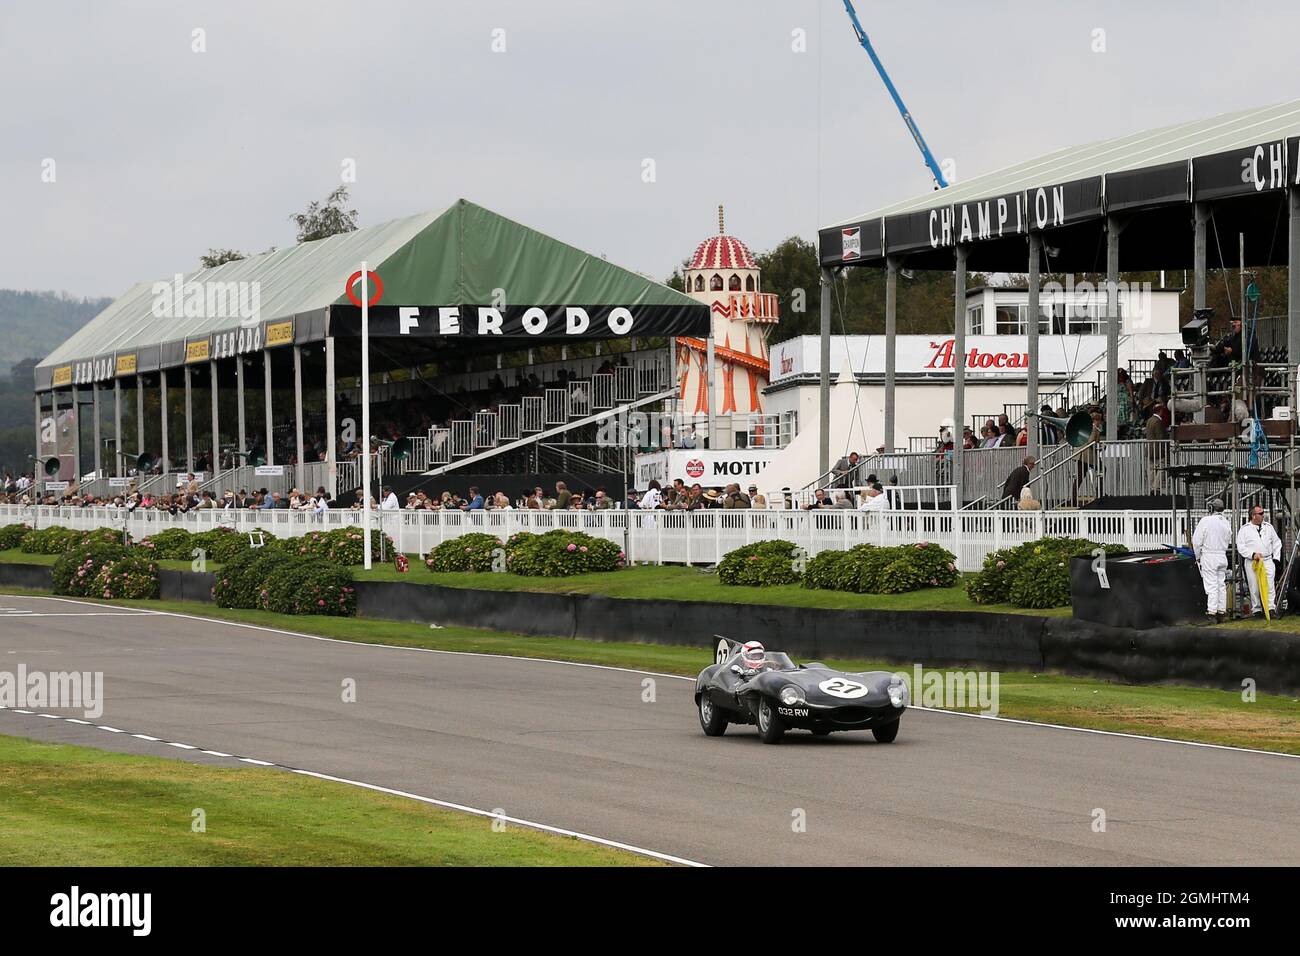 Goodwood Motor Circuit 17 September 2021 #27 Gary Pearson driven by Martin Brundle 1955 JAGUAR-D-TYPE during the Goodwood Revival Goodwood, Chichester, UK Stock Photo